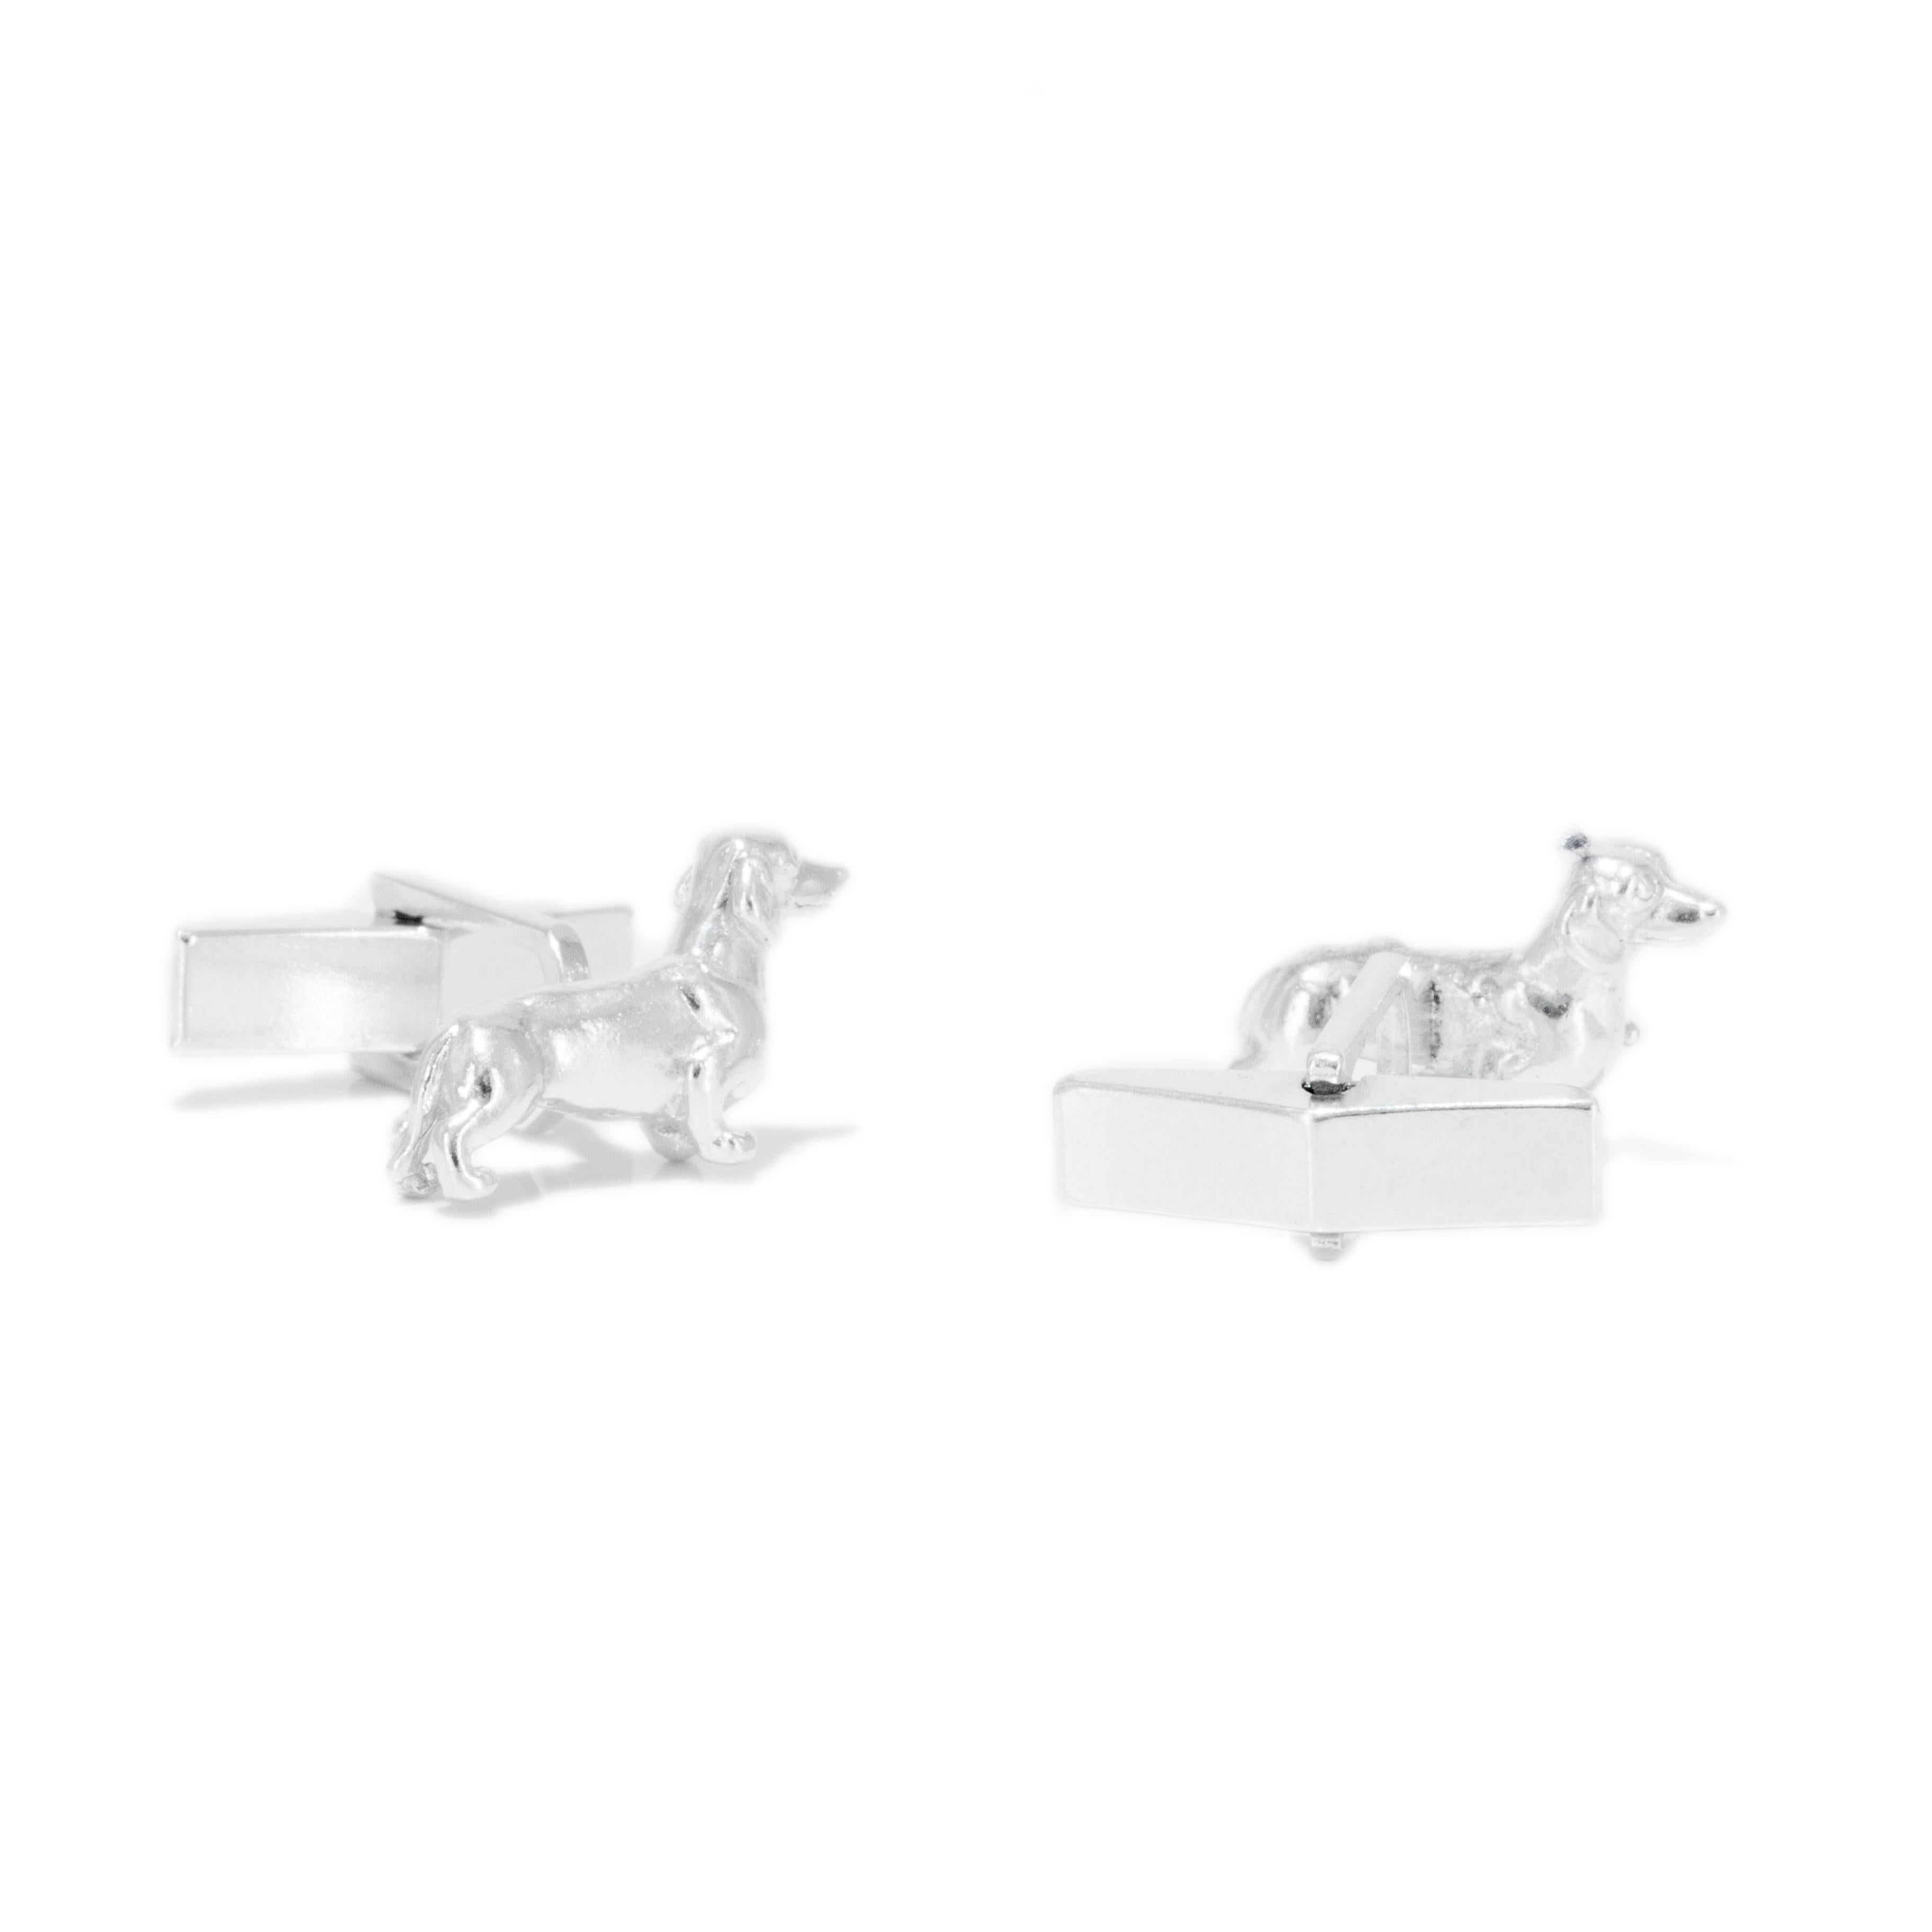 Dachshund Cufflinks in Sterling Silver In New Condition For Sale In London, GB